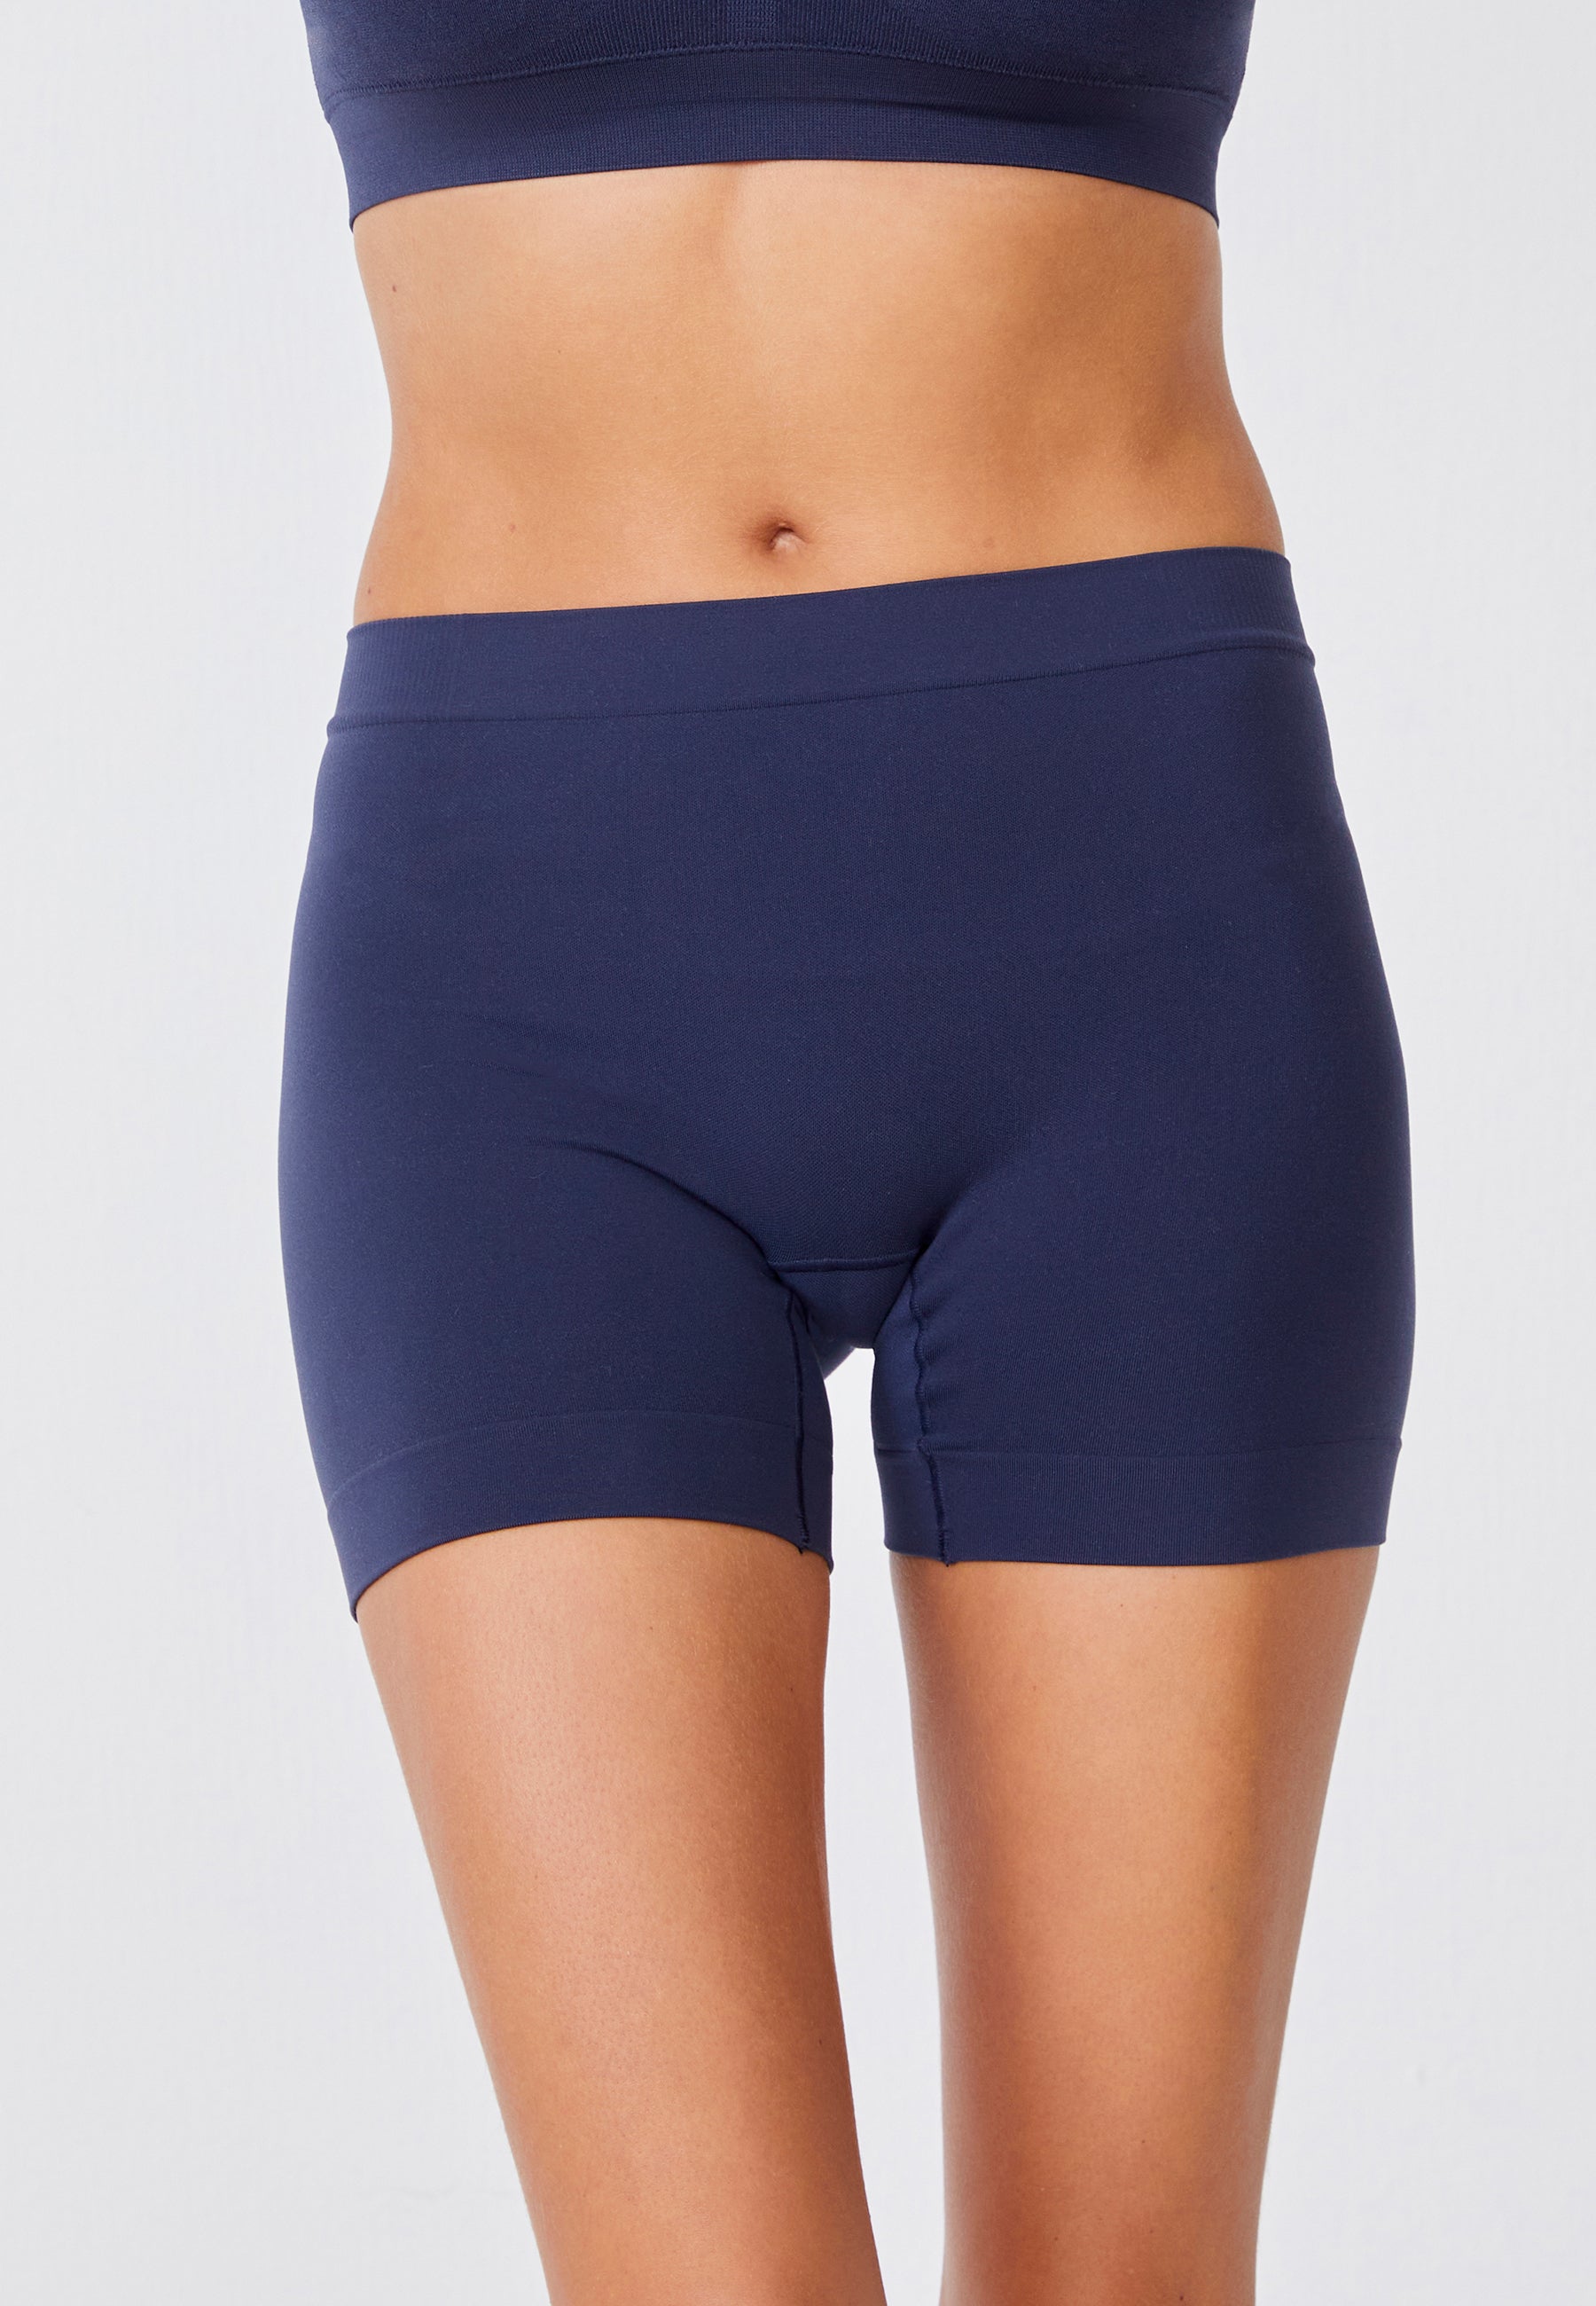 My Jockey Skimmies® Slipshorts Review + Contest Details! - The Budget Babe